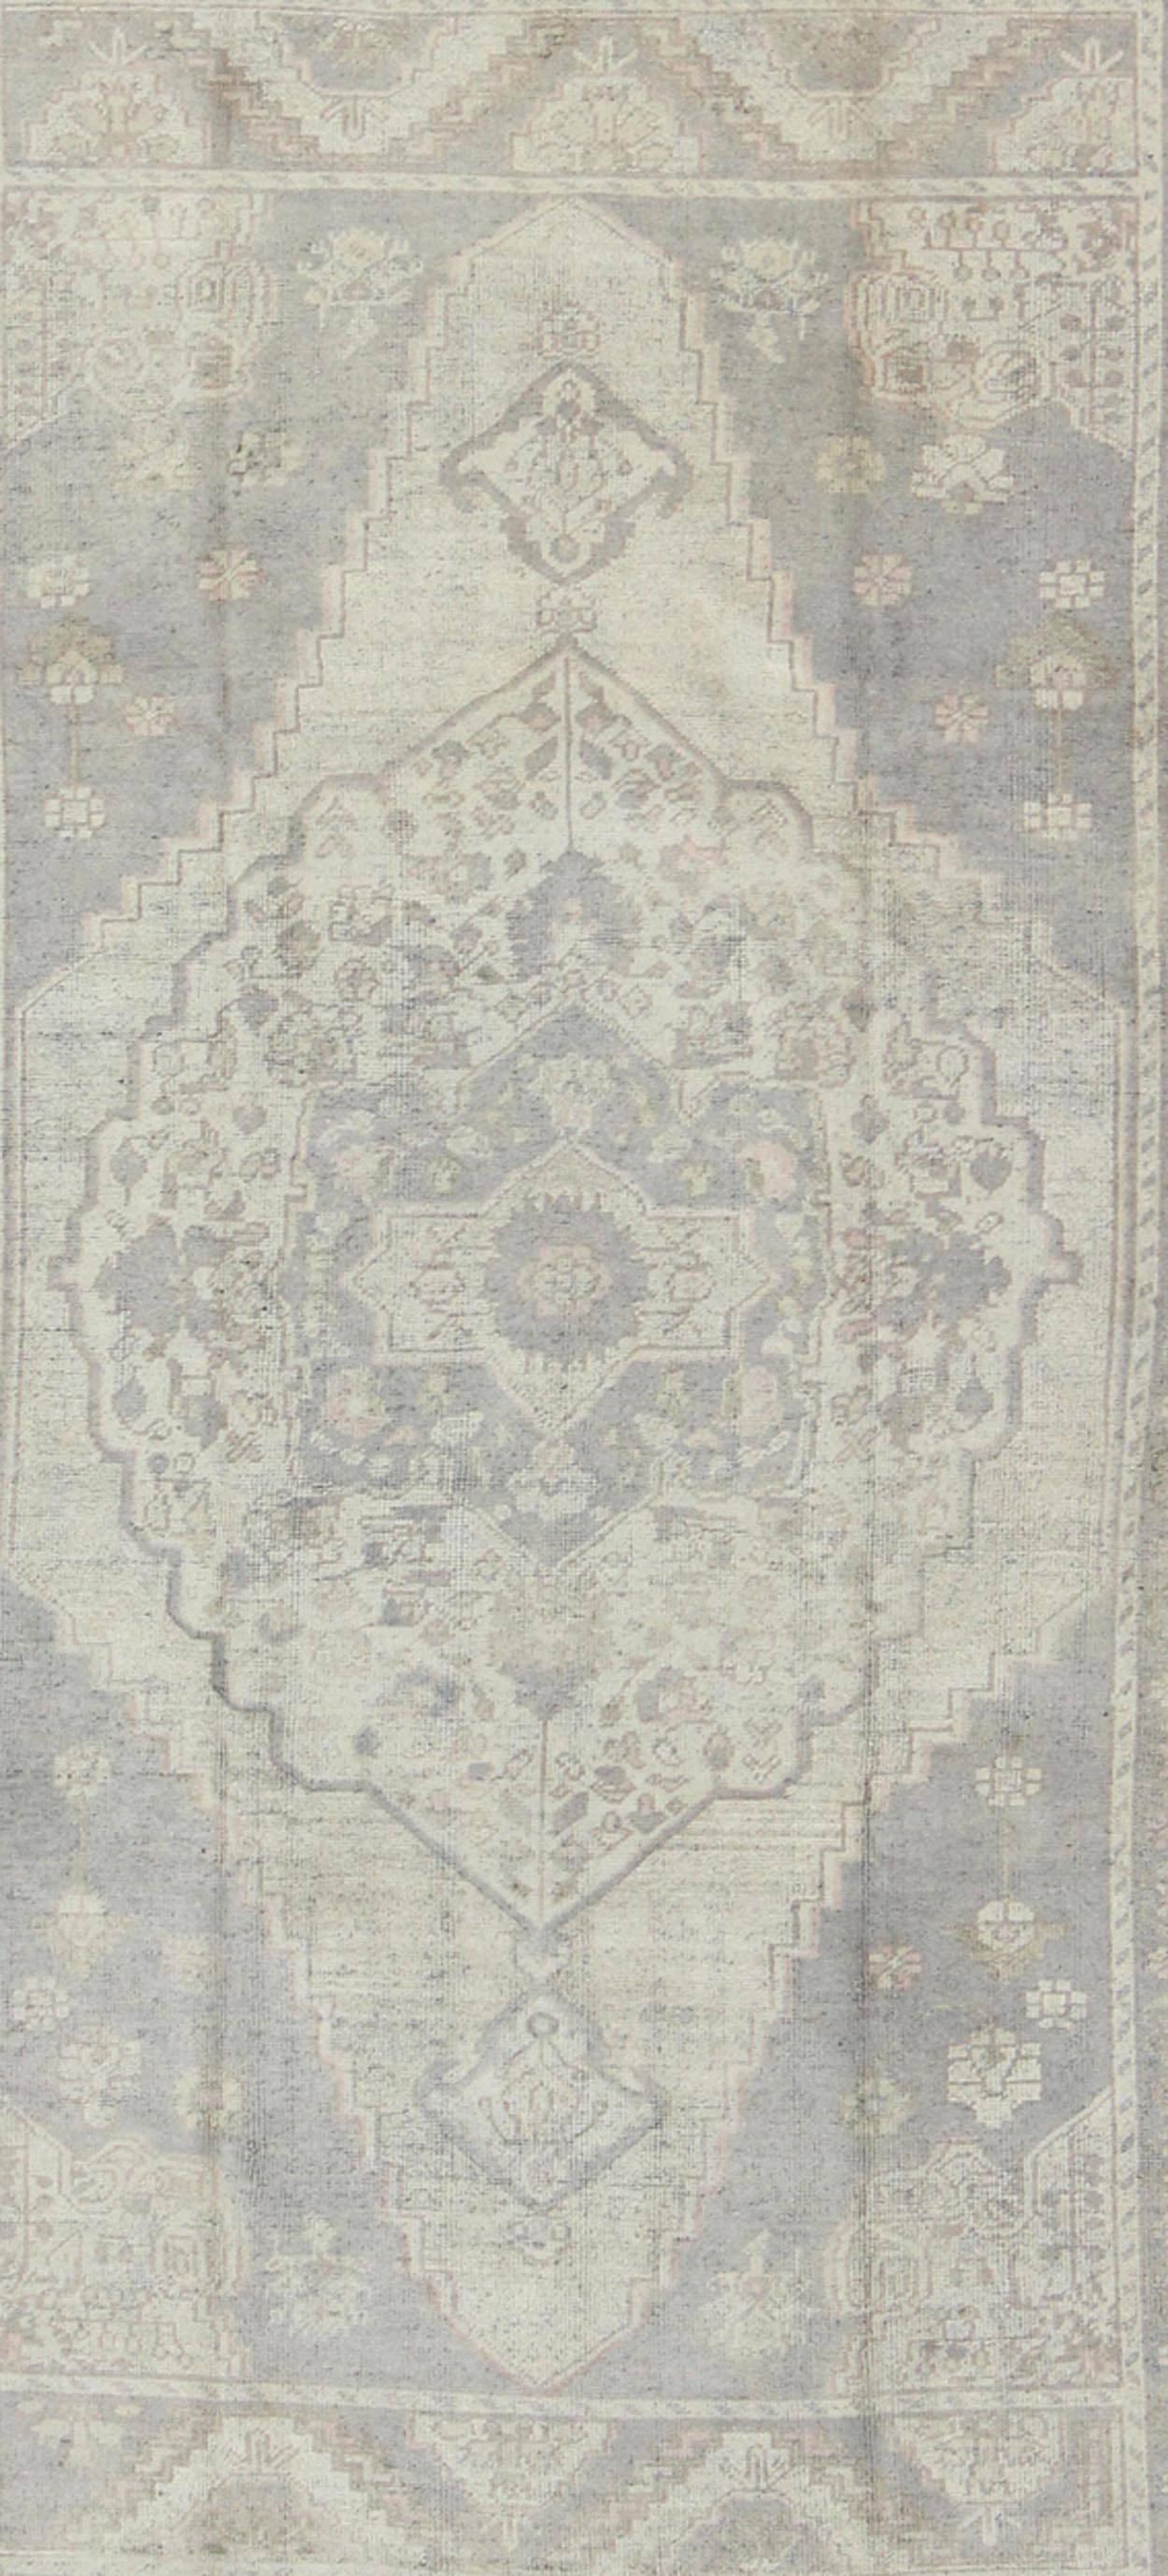 Turkish Vintage Oushak in Muted Colors of Gray, Taupe, Cream and Light Brown